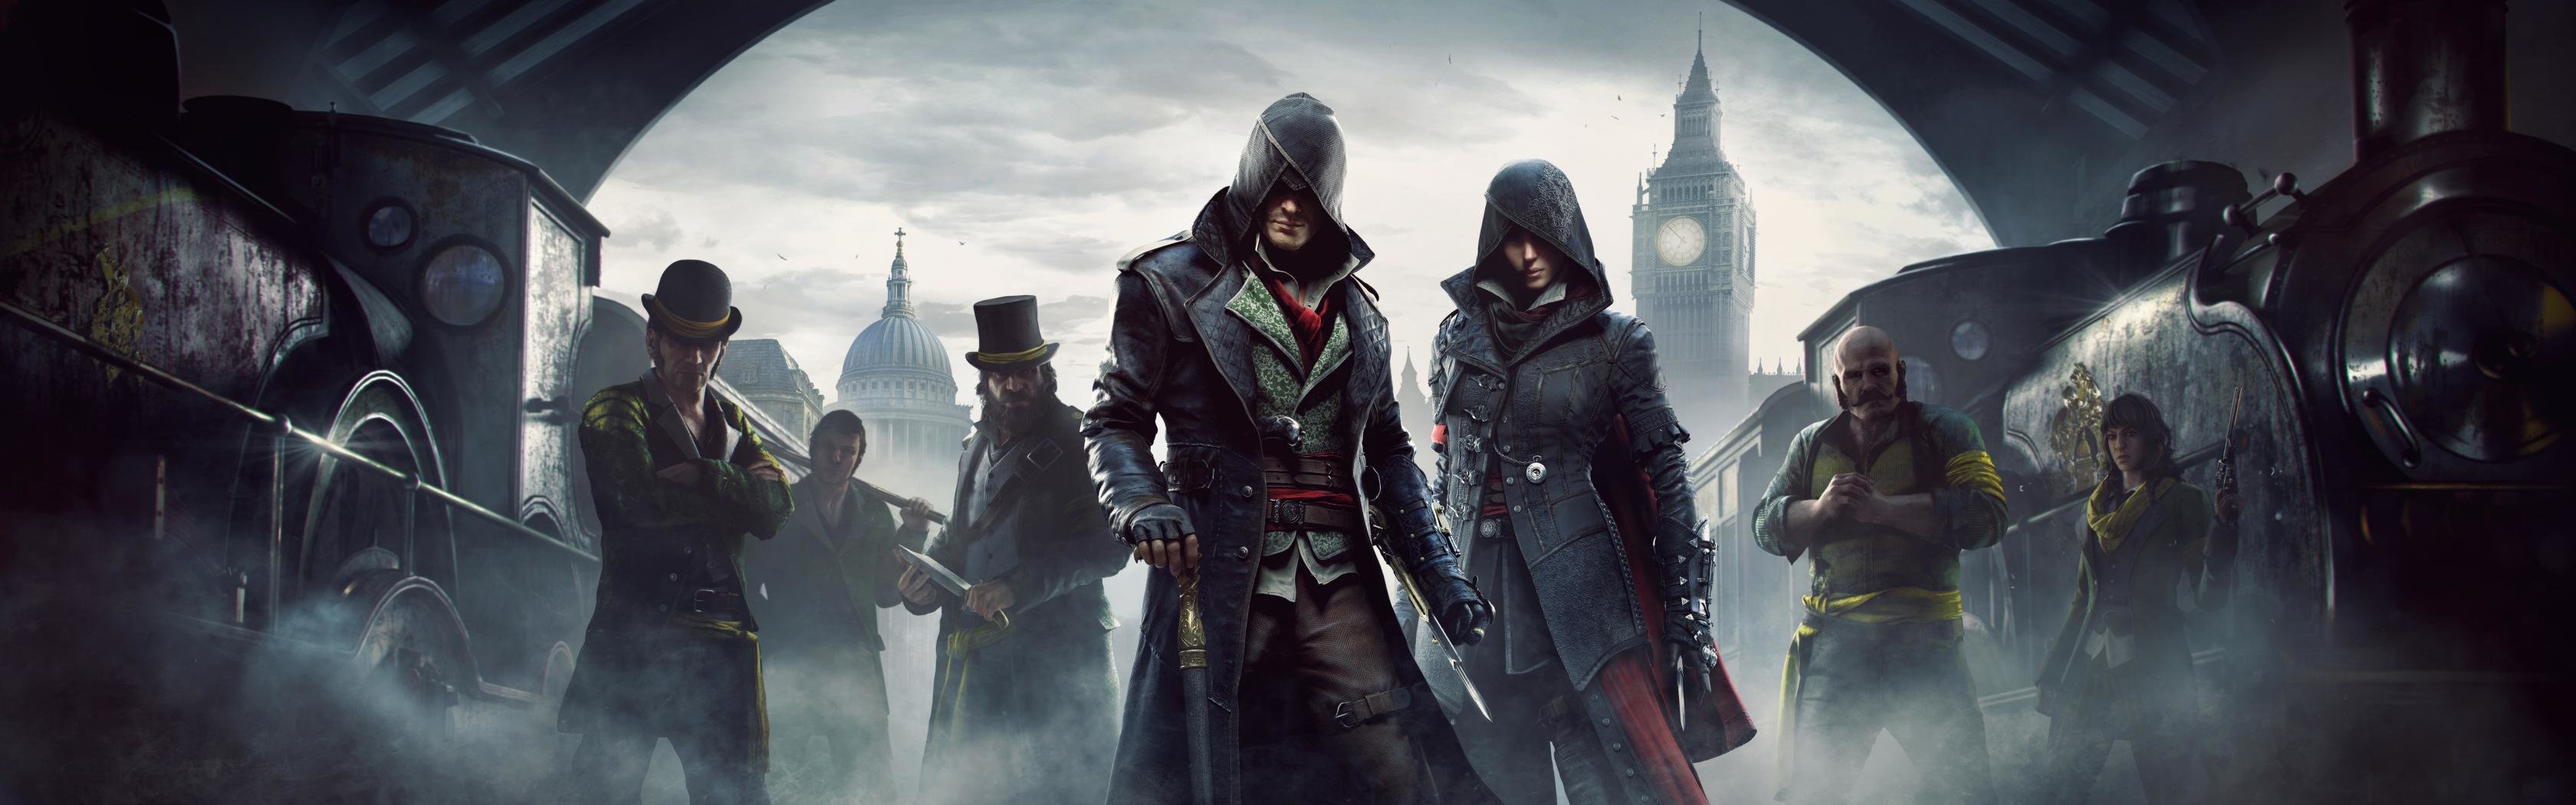 Download Dual Screen Assassin S Creed - Assassins Creed Syndicate - HD Wallpaper 